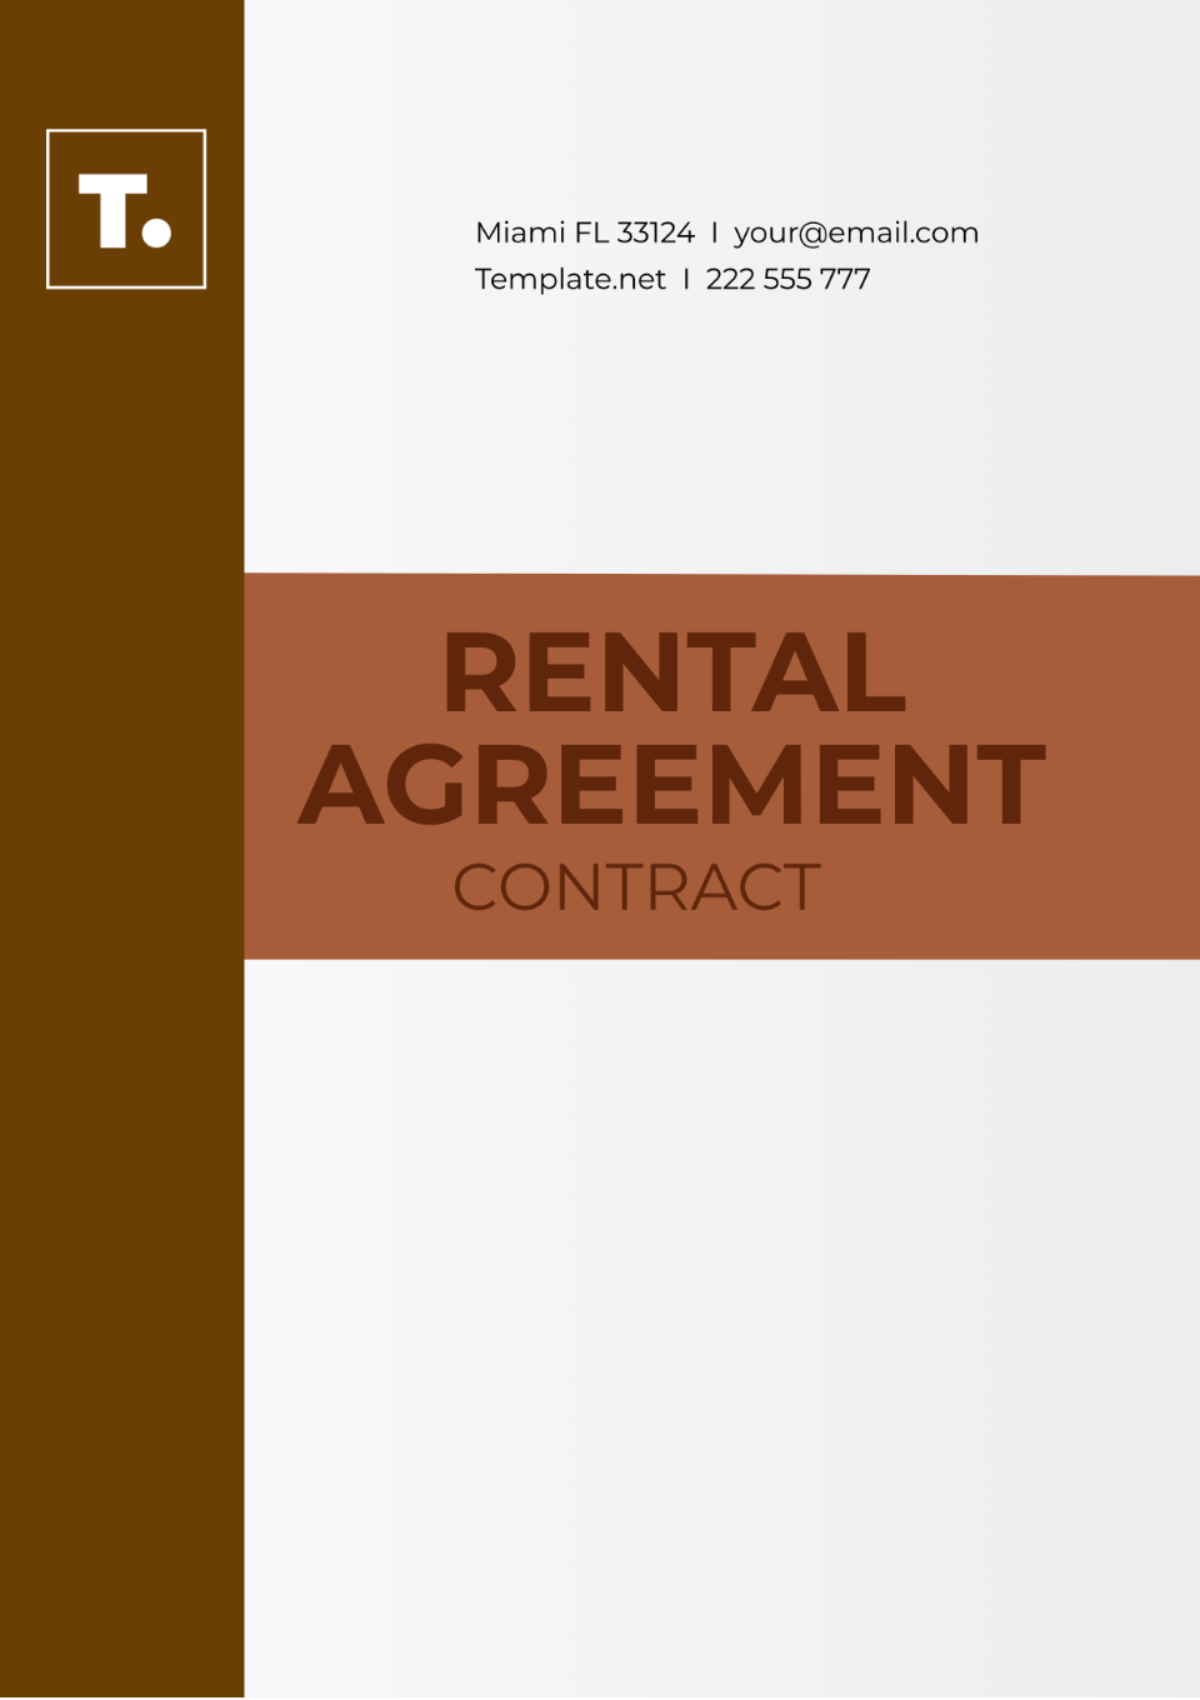 Rental Agreement Contract Template